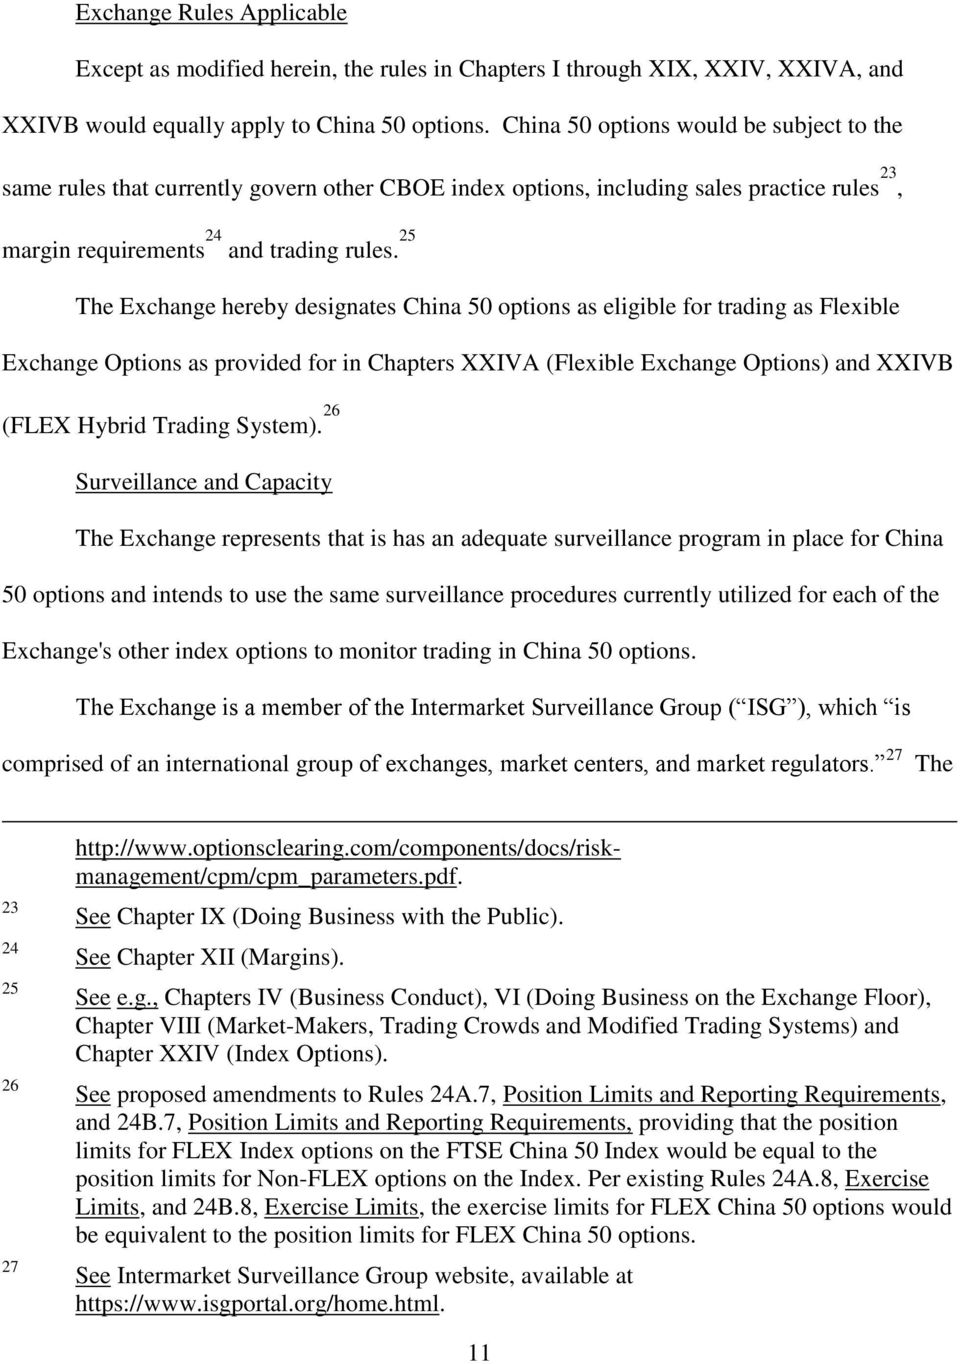 25 The Exchange hereby designates China 50 options as eligible for trading as Flexible Exchange Options as provided for in Chapters XXIVA (Flexible Exchange Options) and XXIVB (FLEX Hybrid Trading